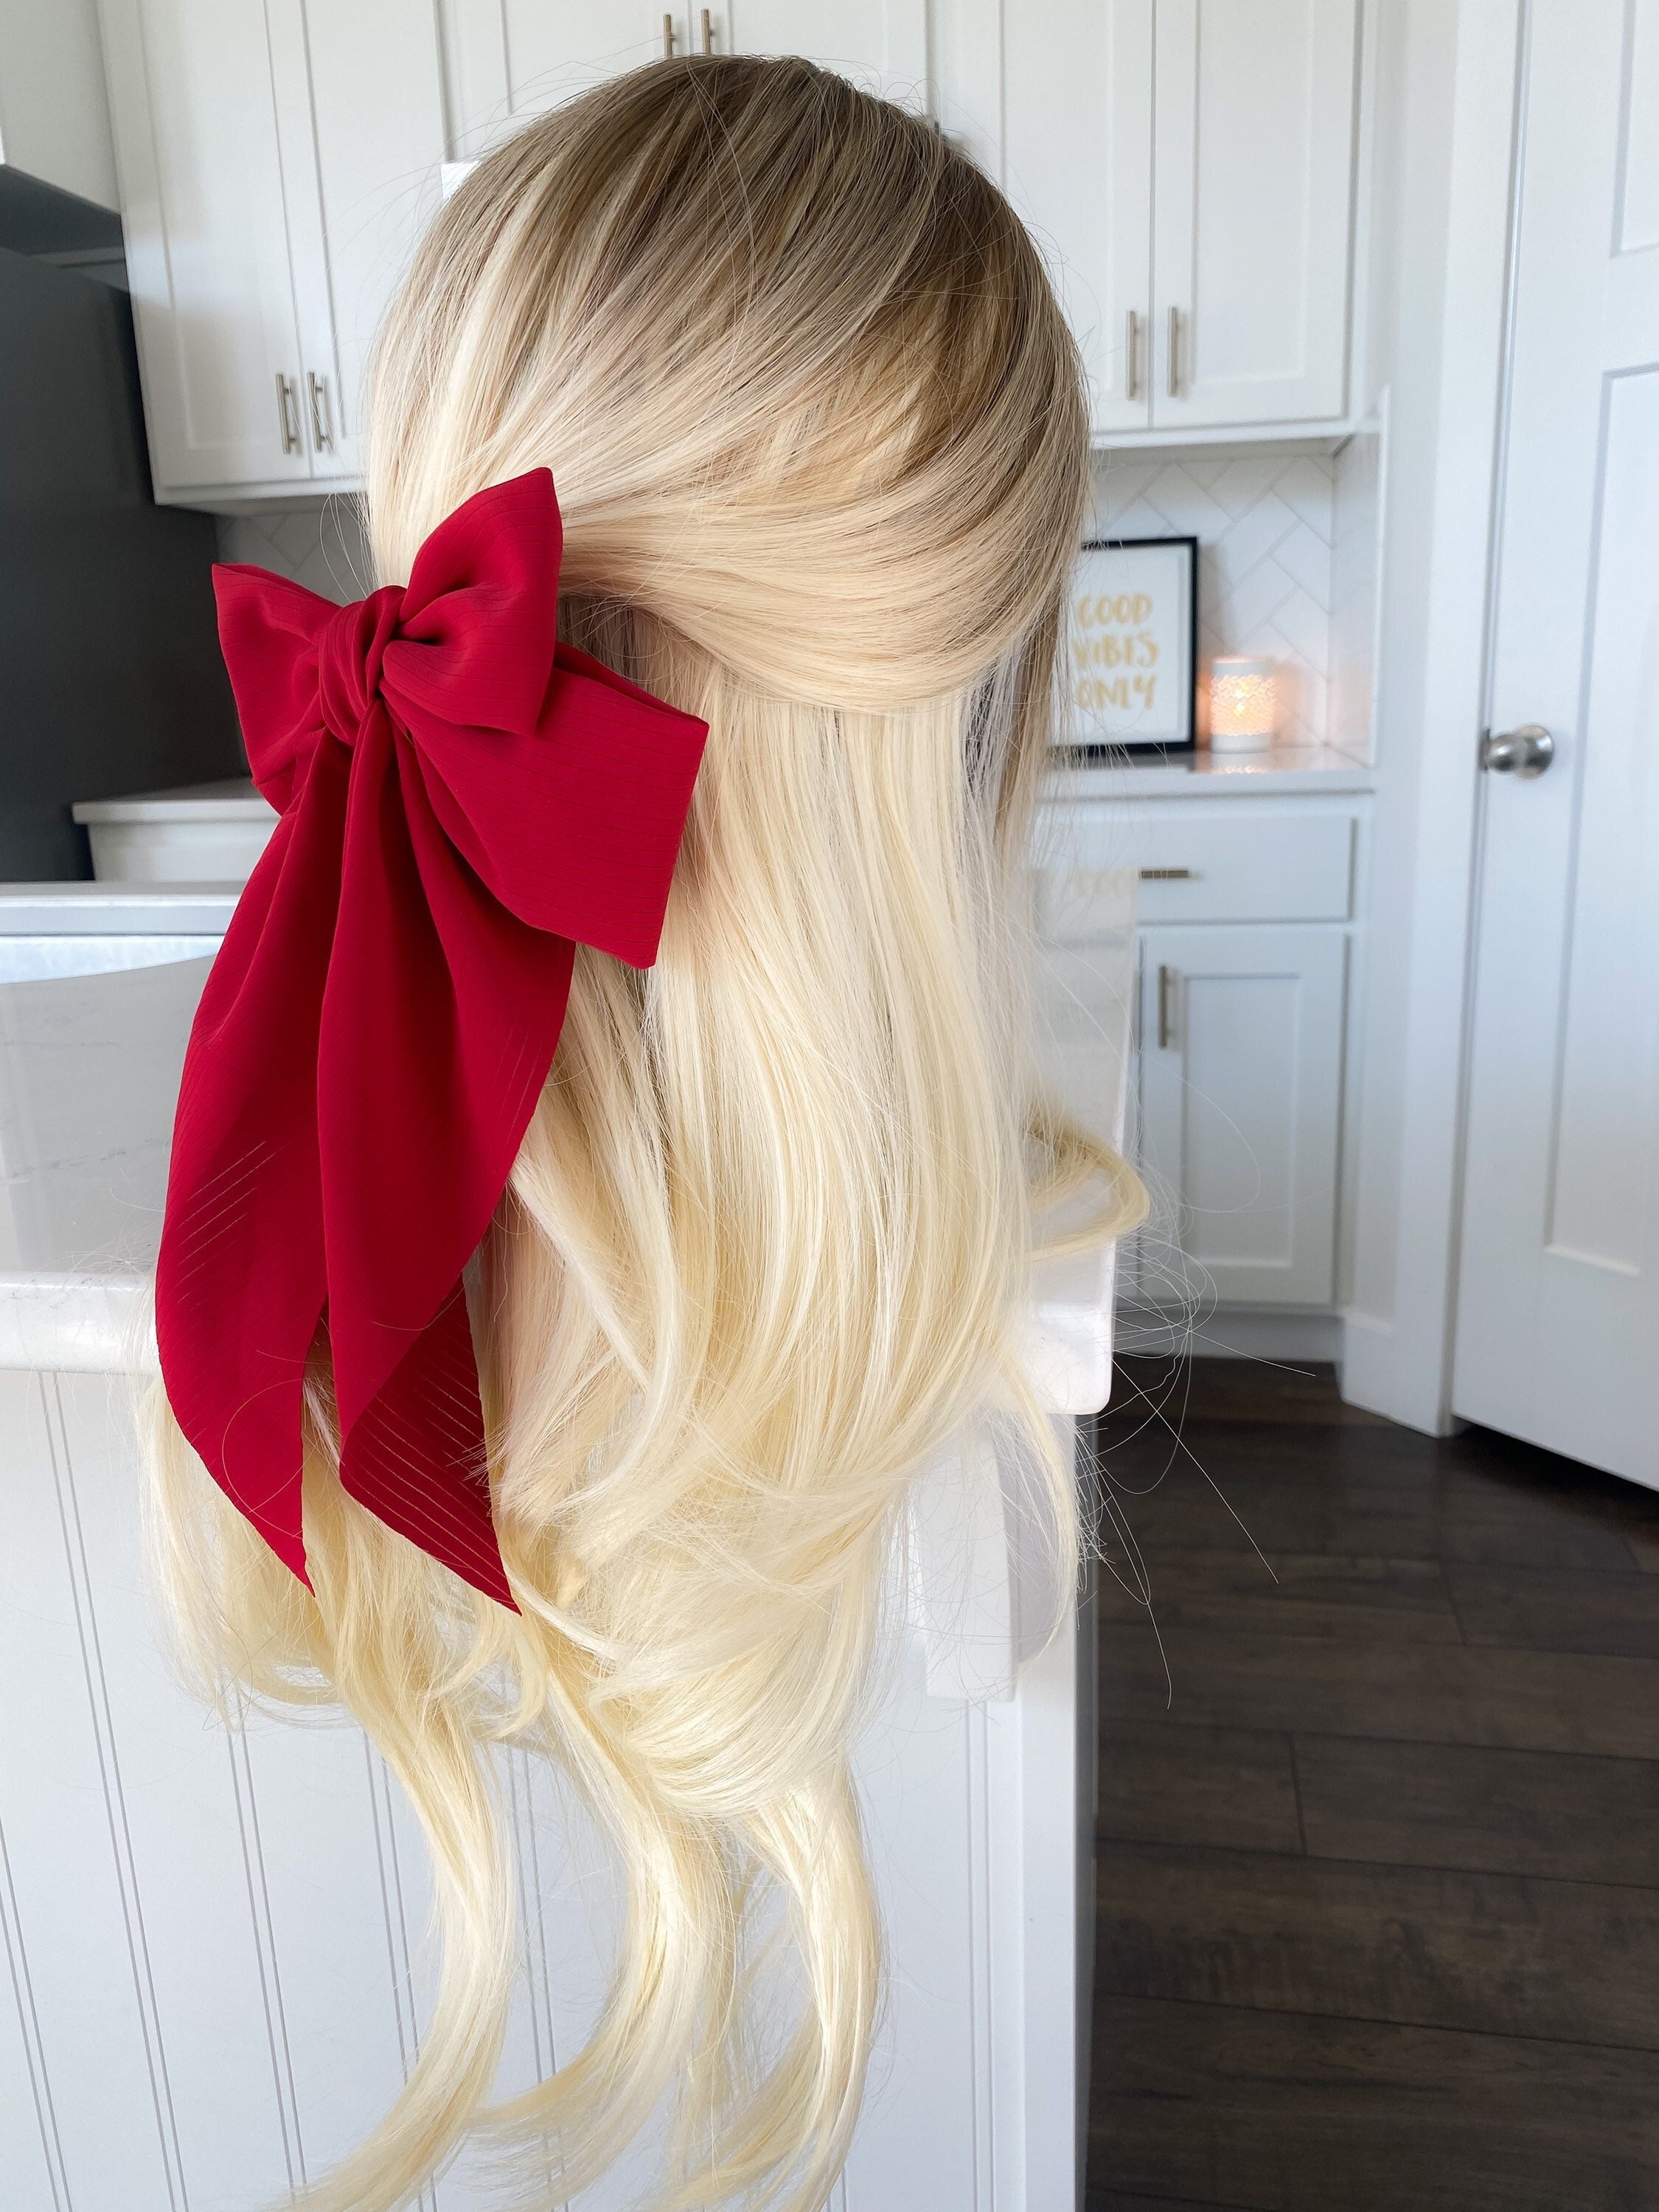  Bohend Big Hair Bows Red Hair Bow with Long Ribbon Rhinestone  Hair Clips Velvet Bow Party Hair Accessories for Women and Girls : Beauty &  Personal Care